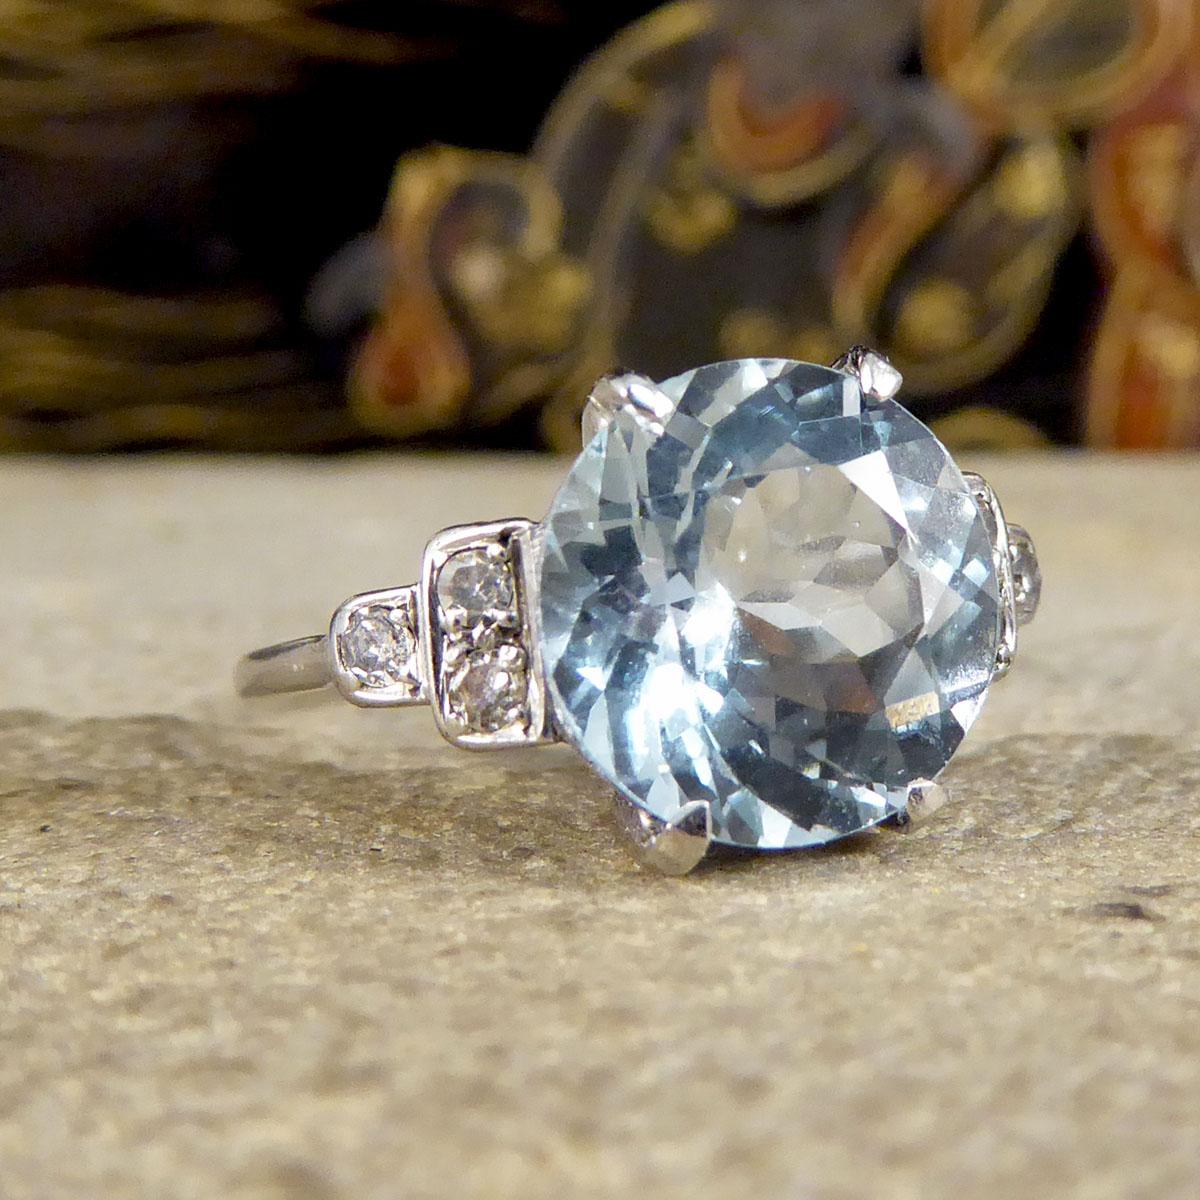 This lovely Art Deco ring features a 2.75ct Round Cut Aquamarine in the centre with a four claw setting. On either shoulder sit a horizontal pyramid of round cut Diamonds, closest to the Aqua are two stones, followed by a single stone closest to the